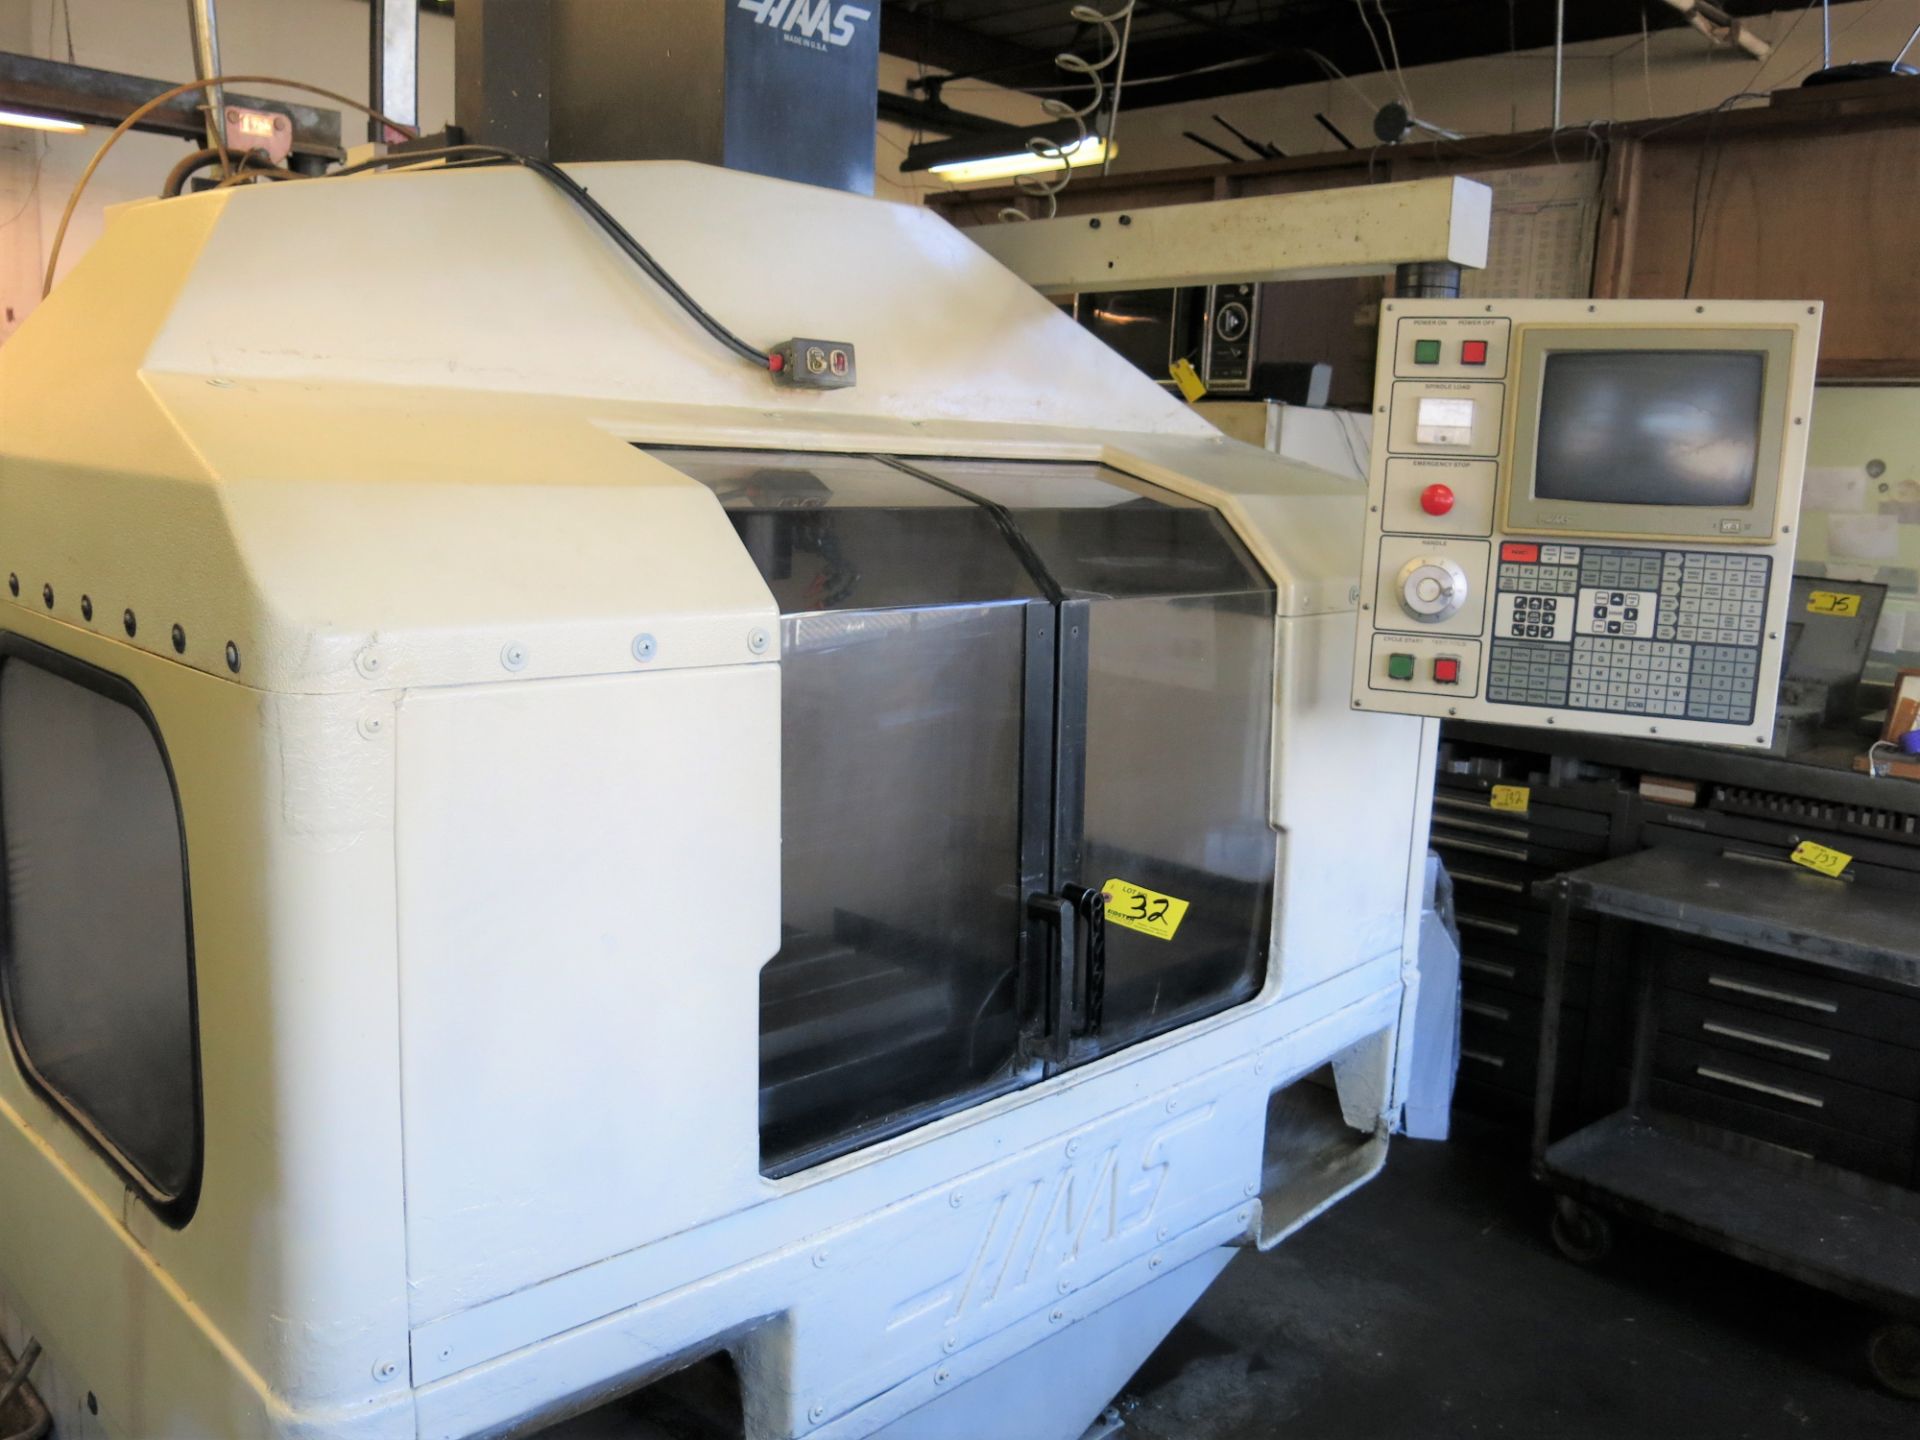 (1) HAAS MDL. VF1 CNC MACHINING CENTER WITH 16 CAT 40 TOOL HOLDING CAROUSEL 26" X 14" T-SLOT